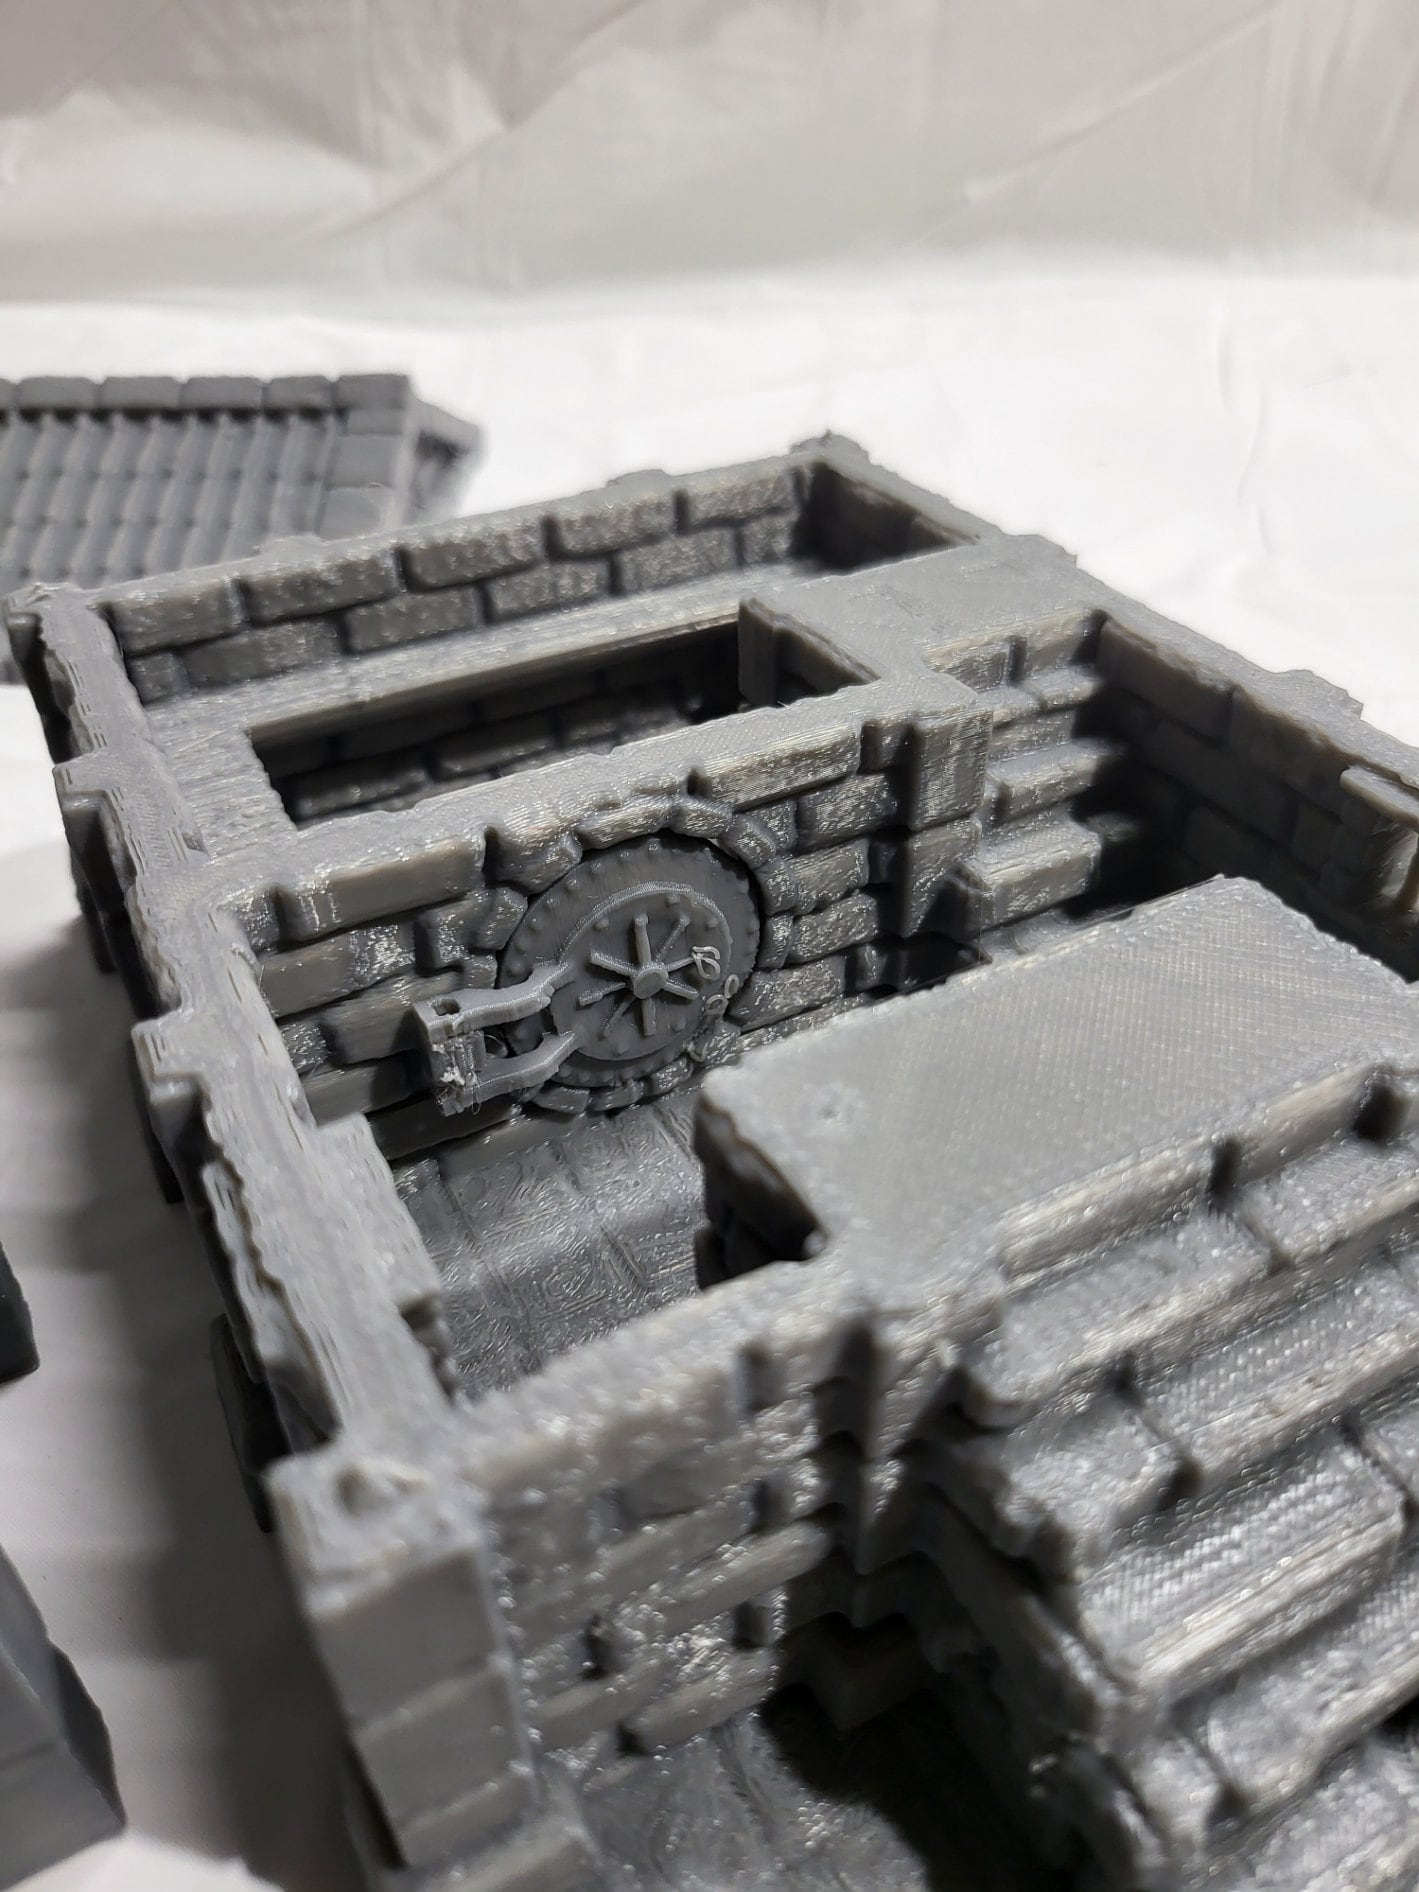 City Bank, Medieval Bank, Vault, Coin Deposit, Repository, Dungeons and dragons, Banking, 28mm Scale, Terrain